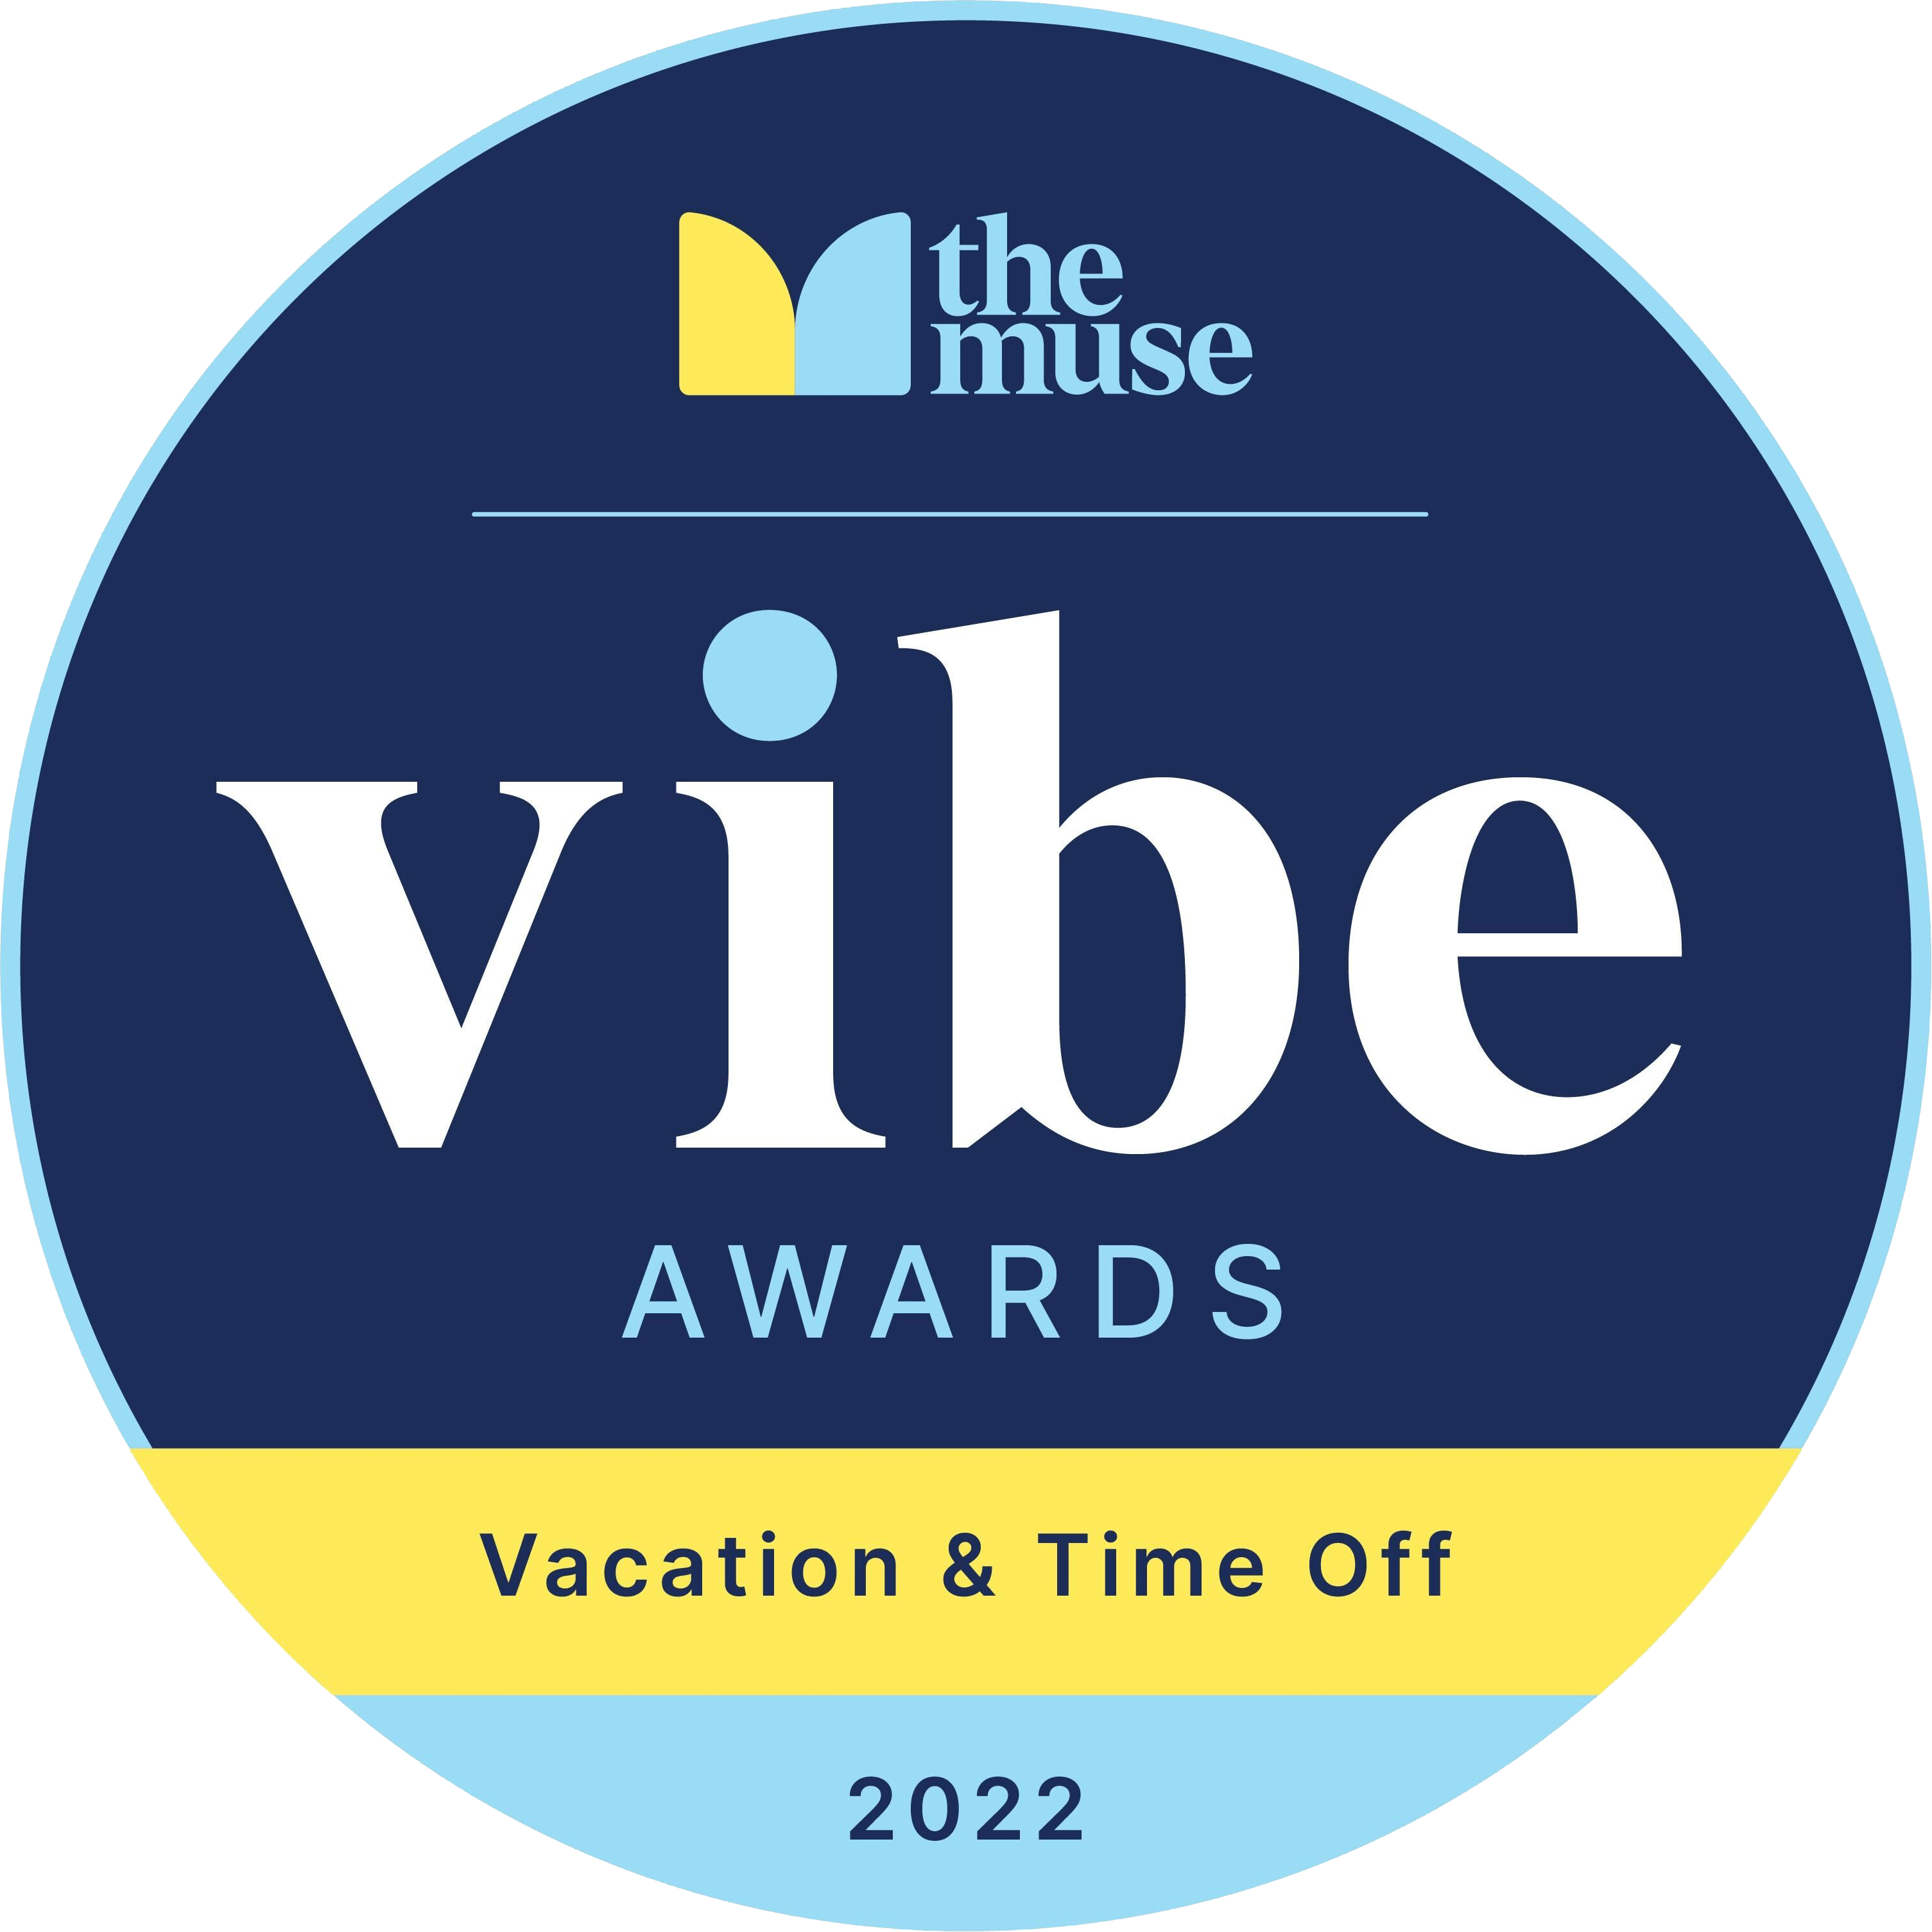 vibe-awards-2022-vacation-and-time-off